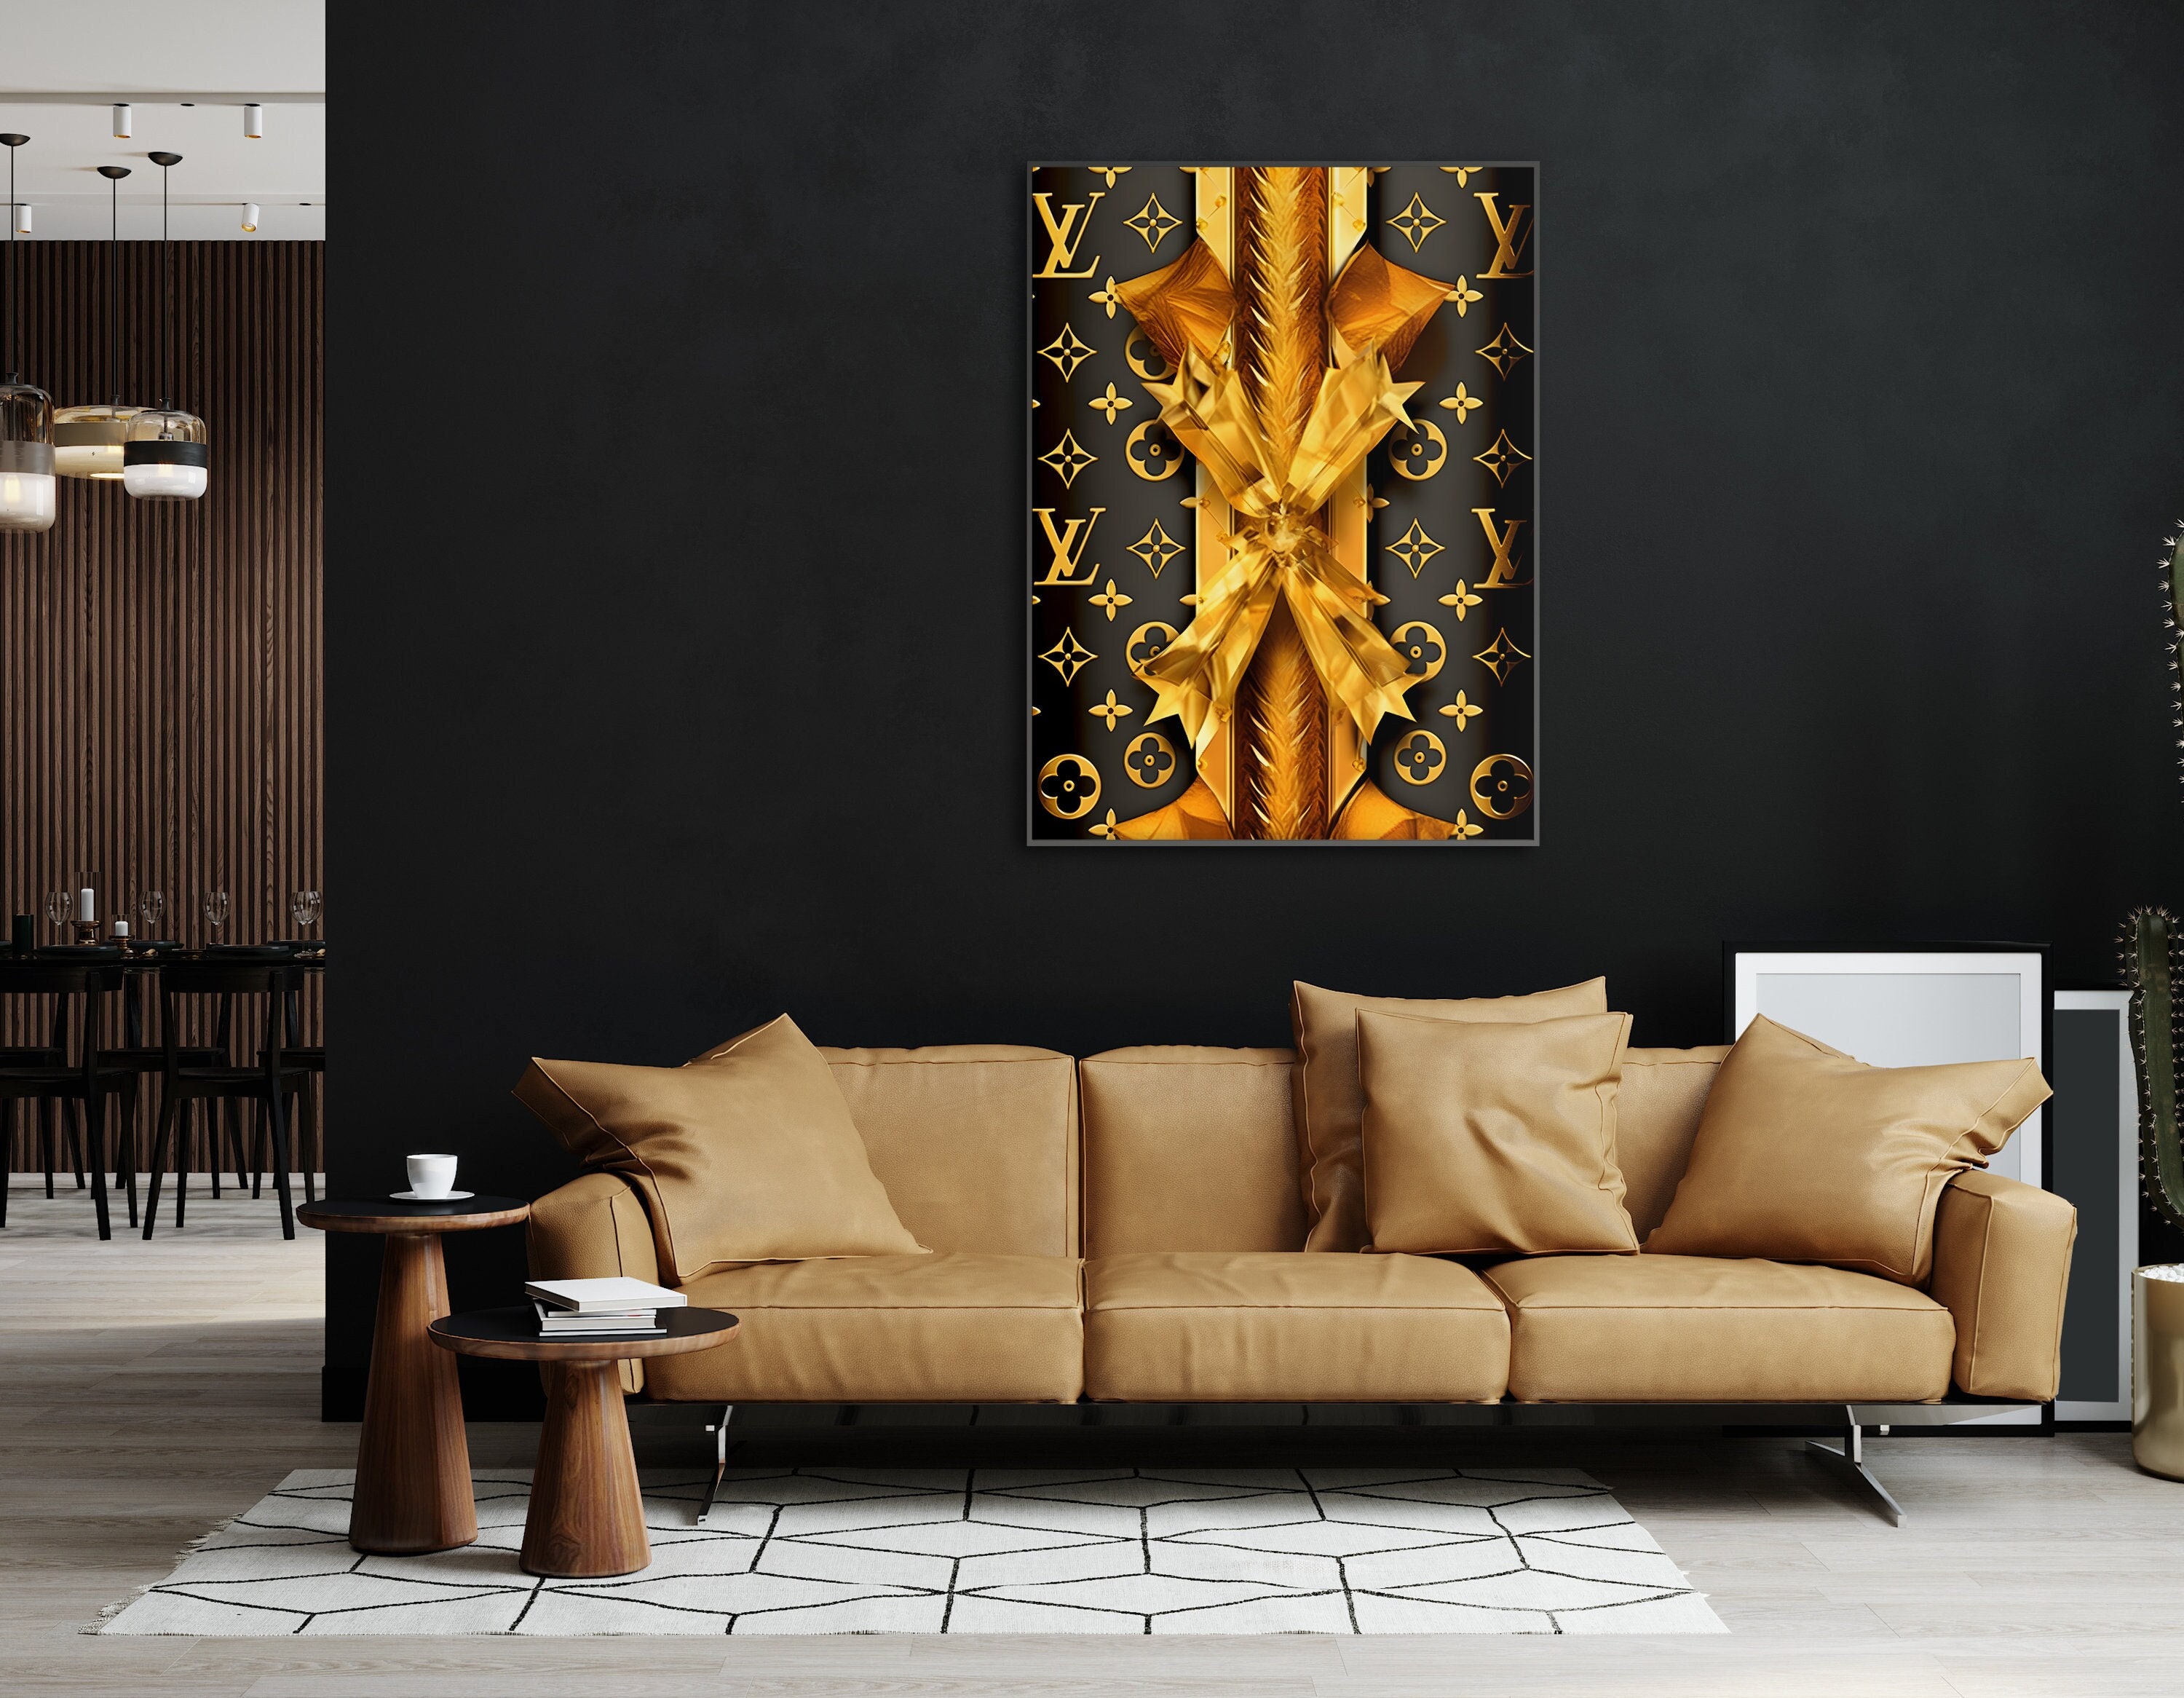 Picture Of Louis Vuitton Colorful Picture Canvas On The Wall Modern Home  Room Decor Picture Posters For Home New Year Present Glamor Fashion Coco  Fashion Design Famous Bred Quality Europe Paris Fashion